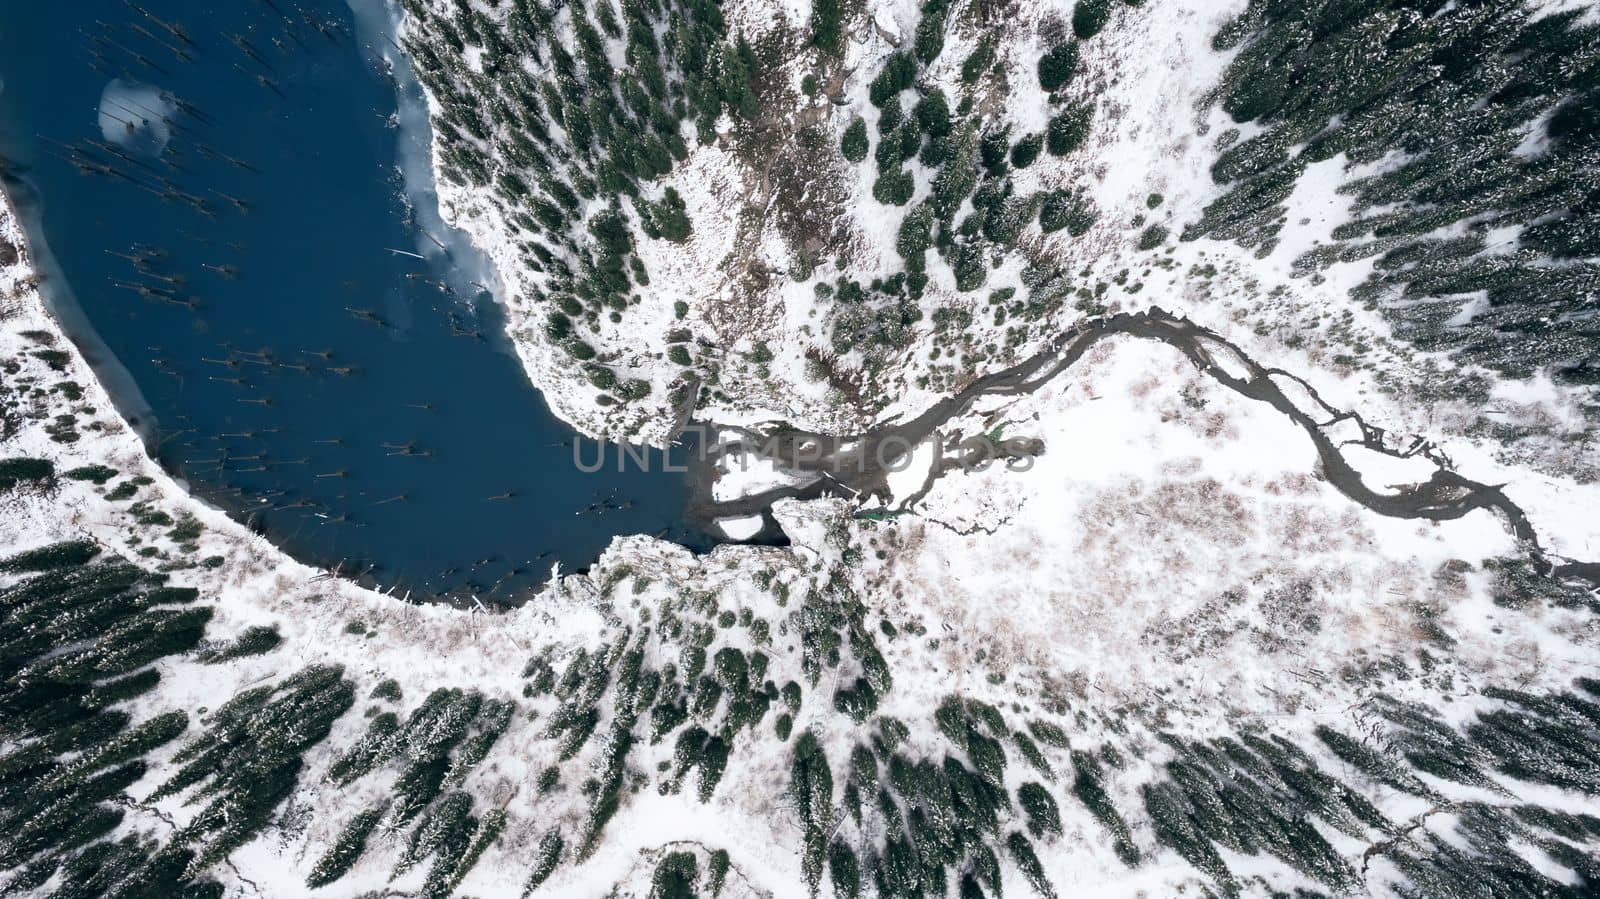 Kaindy Mountain Lake in winter. Drone view of the freezing dark water. Trunks of frozen fir trees come out of the lake. There is a coniferous forest and mountains covered with white snow all around